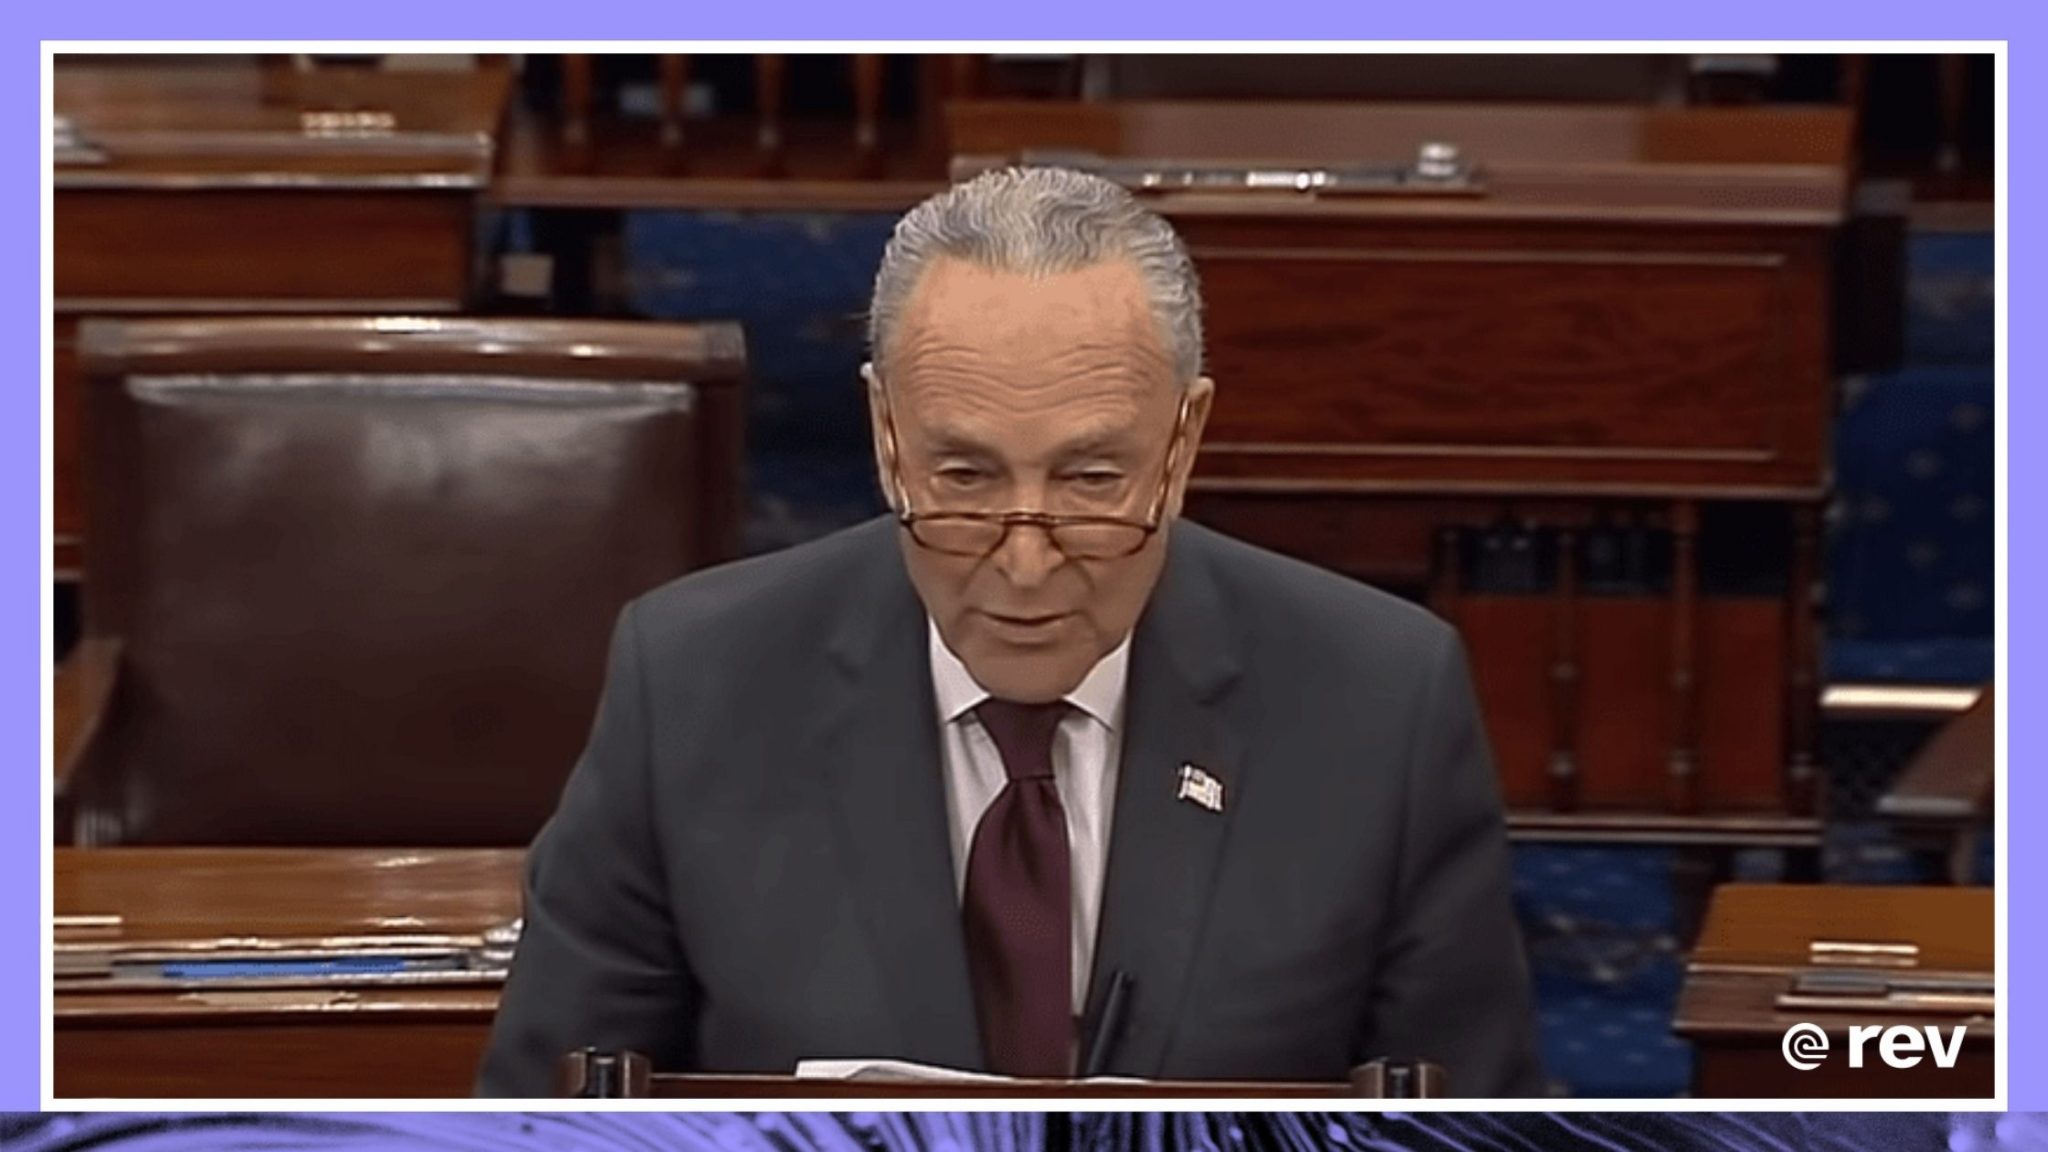 Senator Schumer & McConnell and President Biden reactions to leaked U.S. Supreme Court draft opinion in pending case regarding abortion. 5/03/22 Transcript